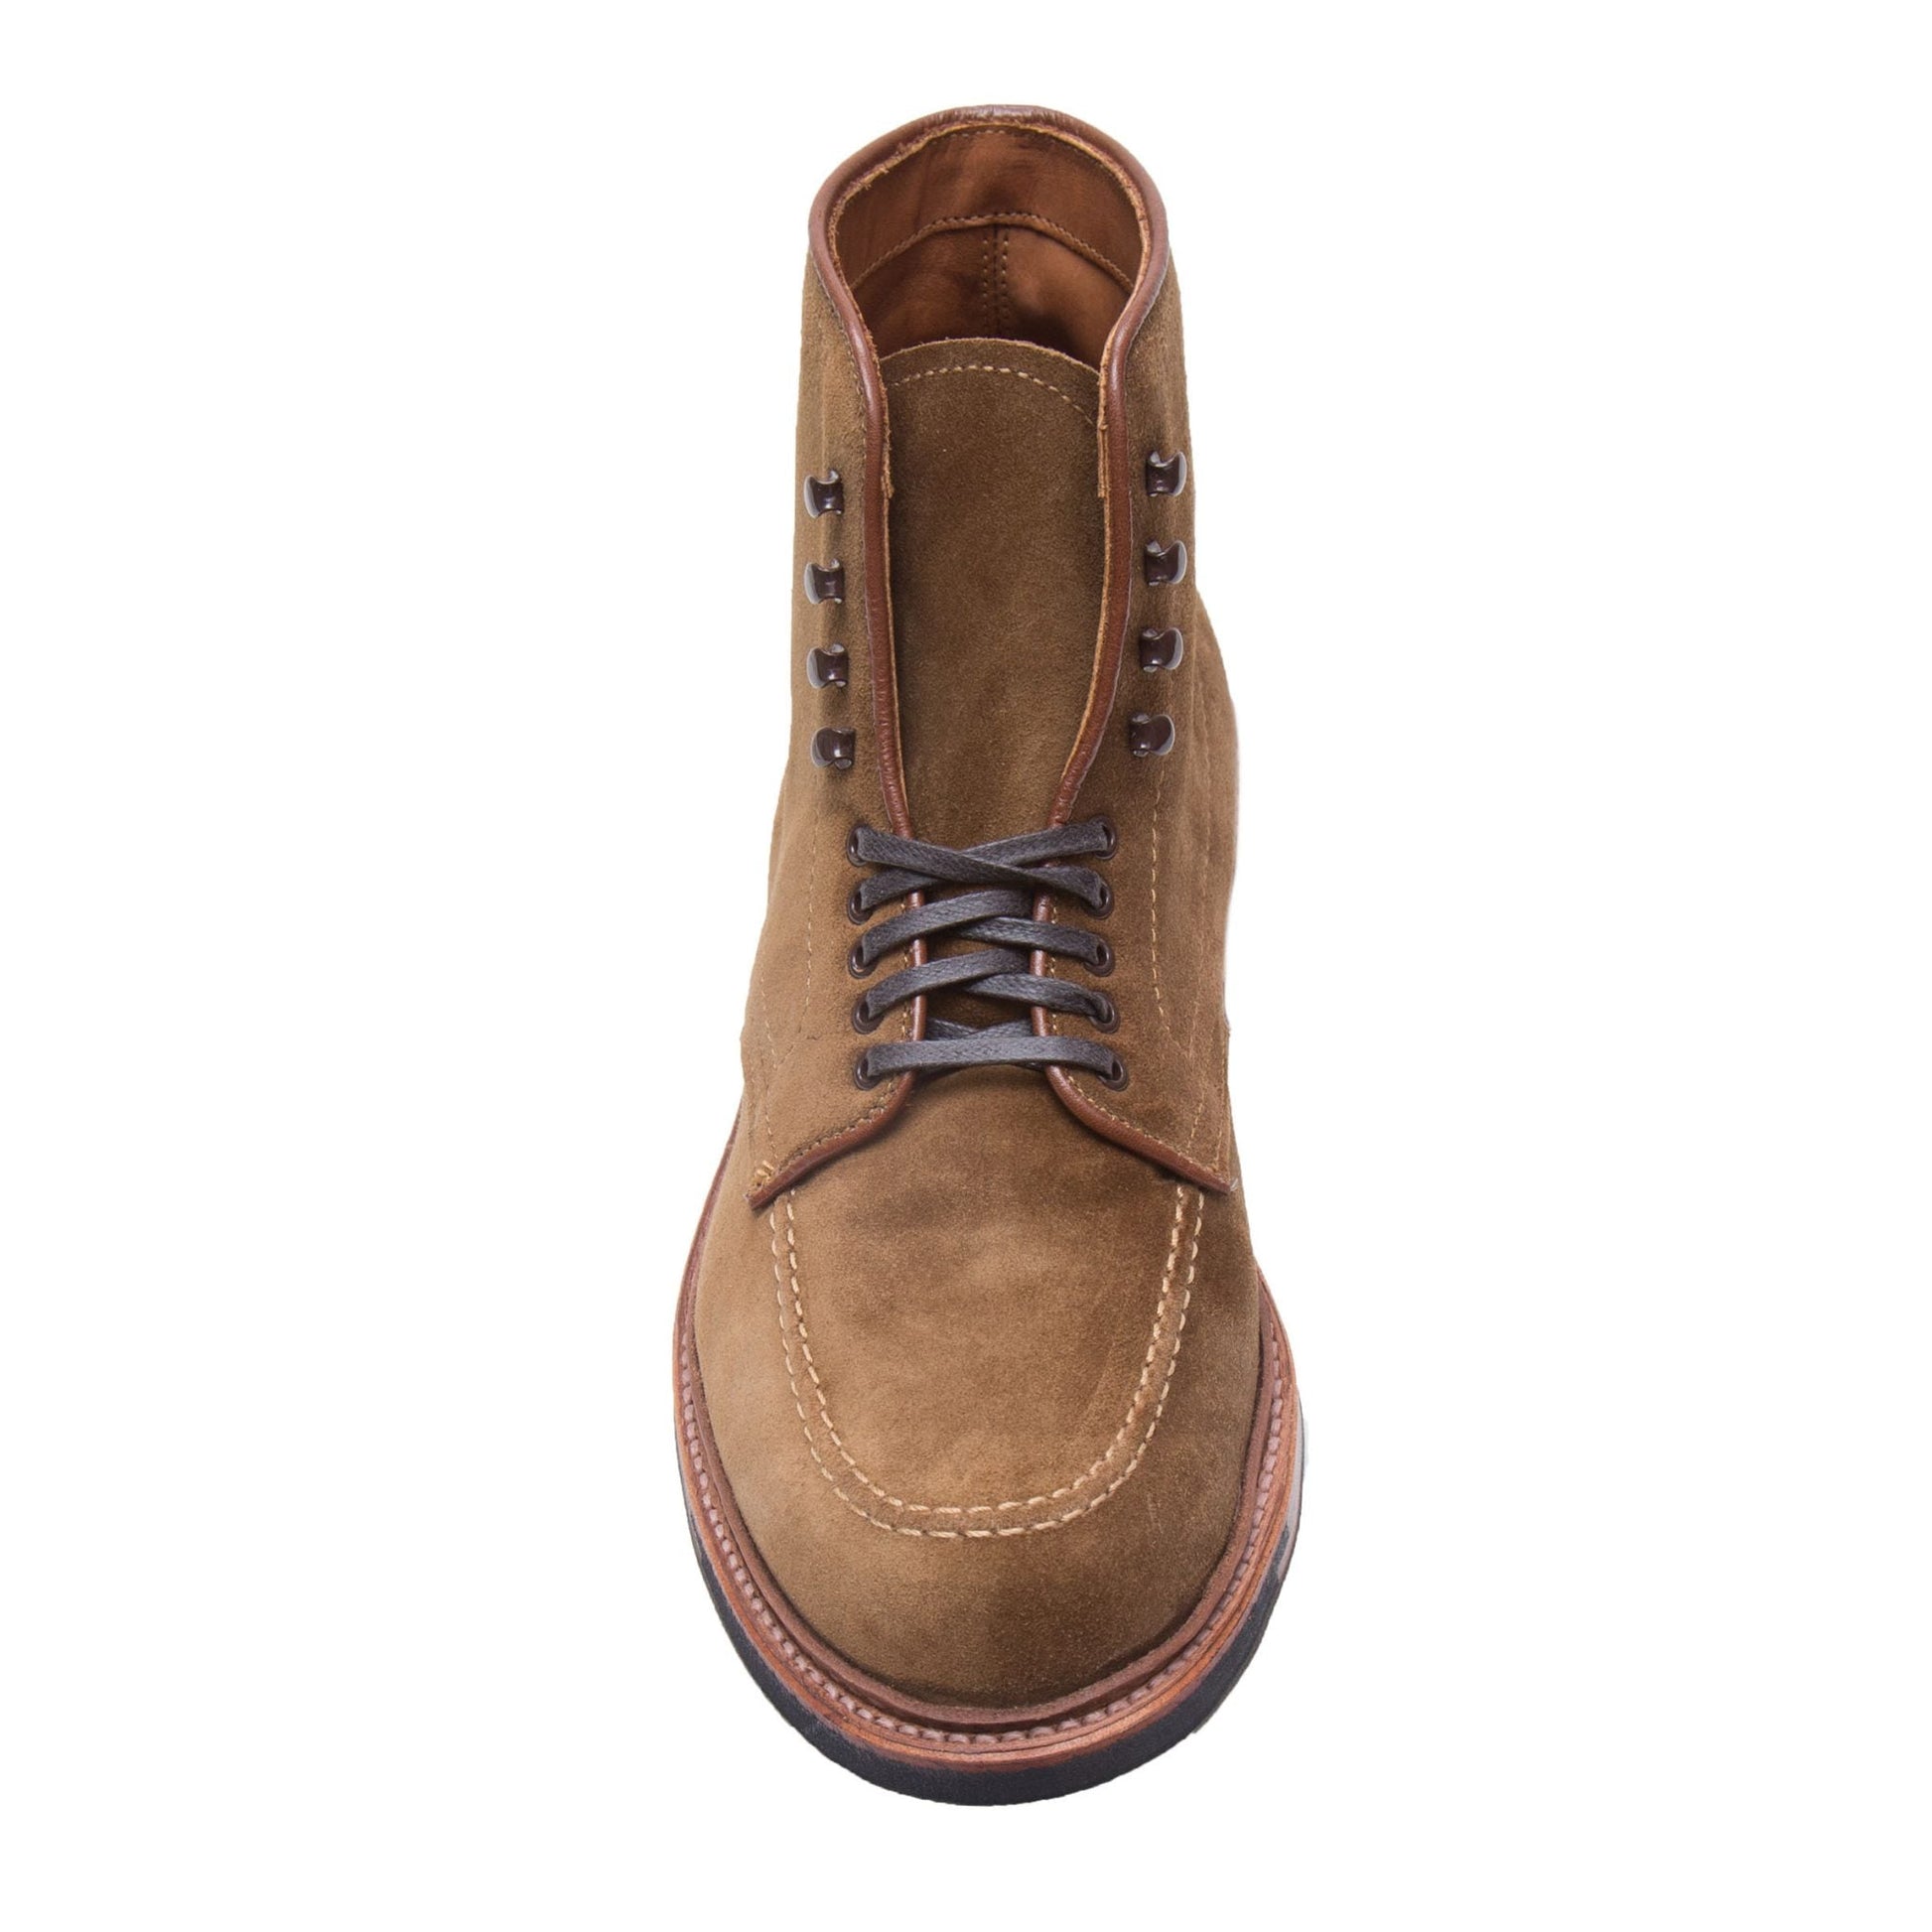 4011HC - Indy Boot in Snuff Suede – Alden Madison